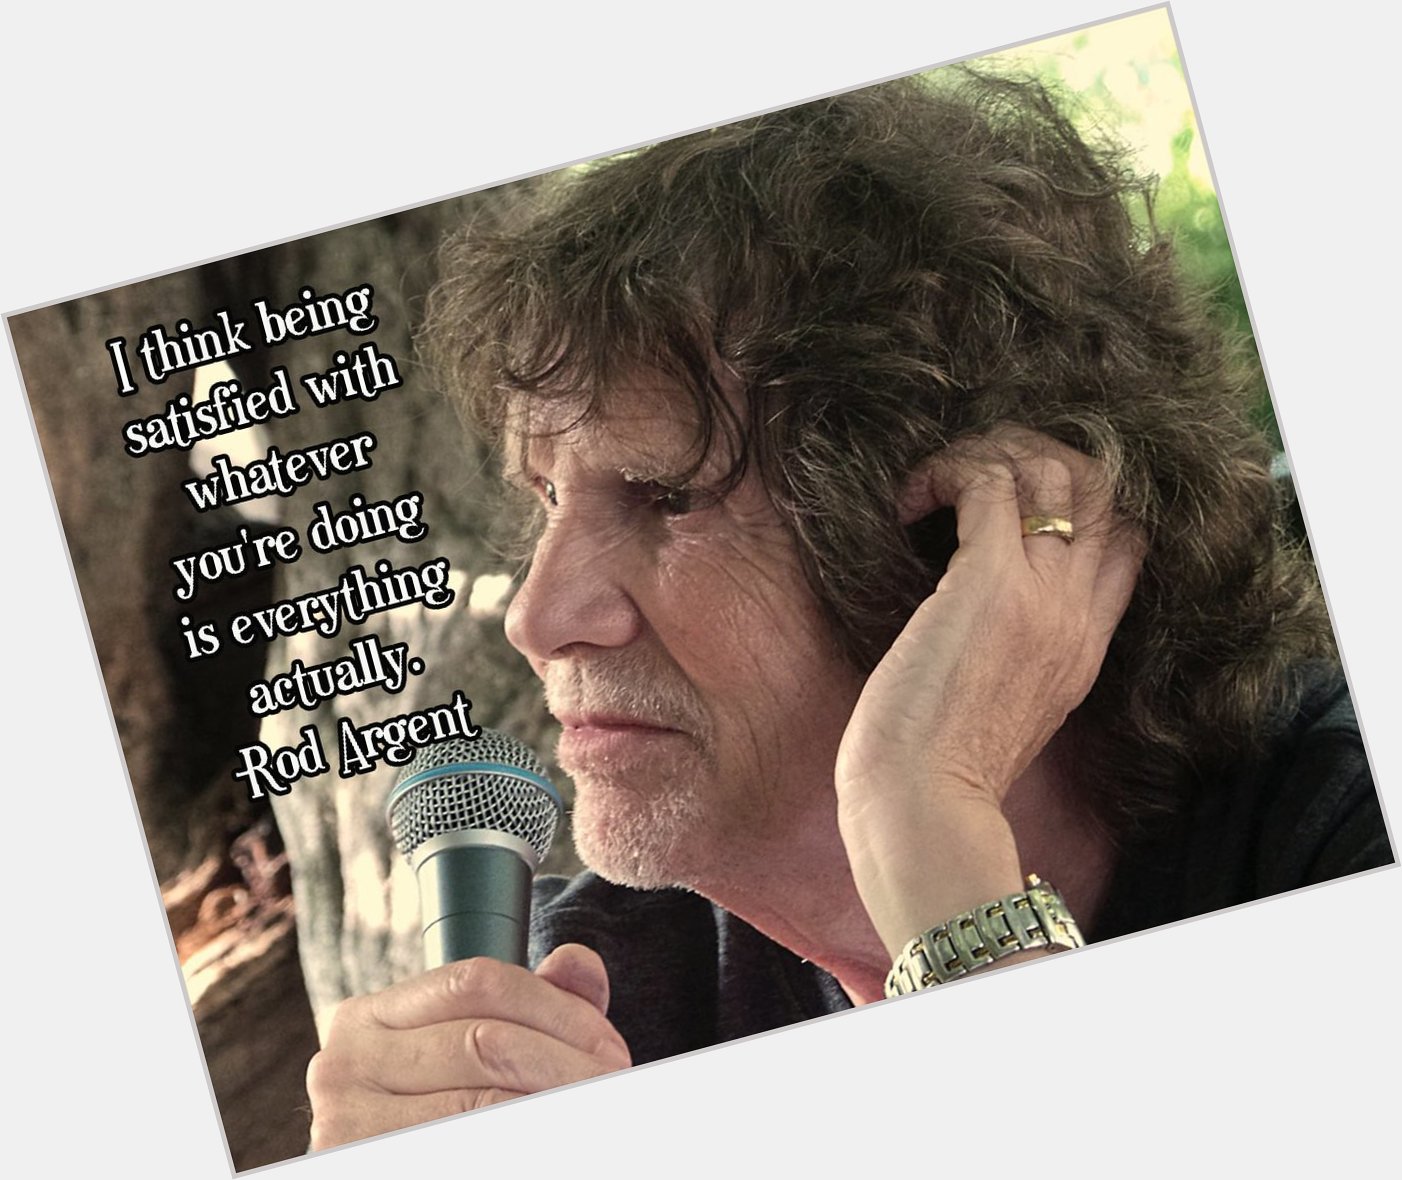 Happy 76th Birthday to Rod Argent, who was born in St Albans, Hertfordshire, England on this day in 1945. 